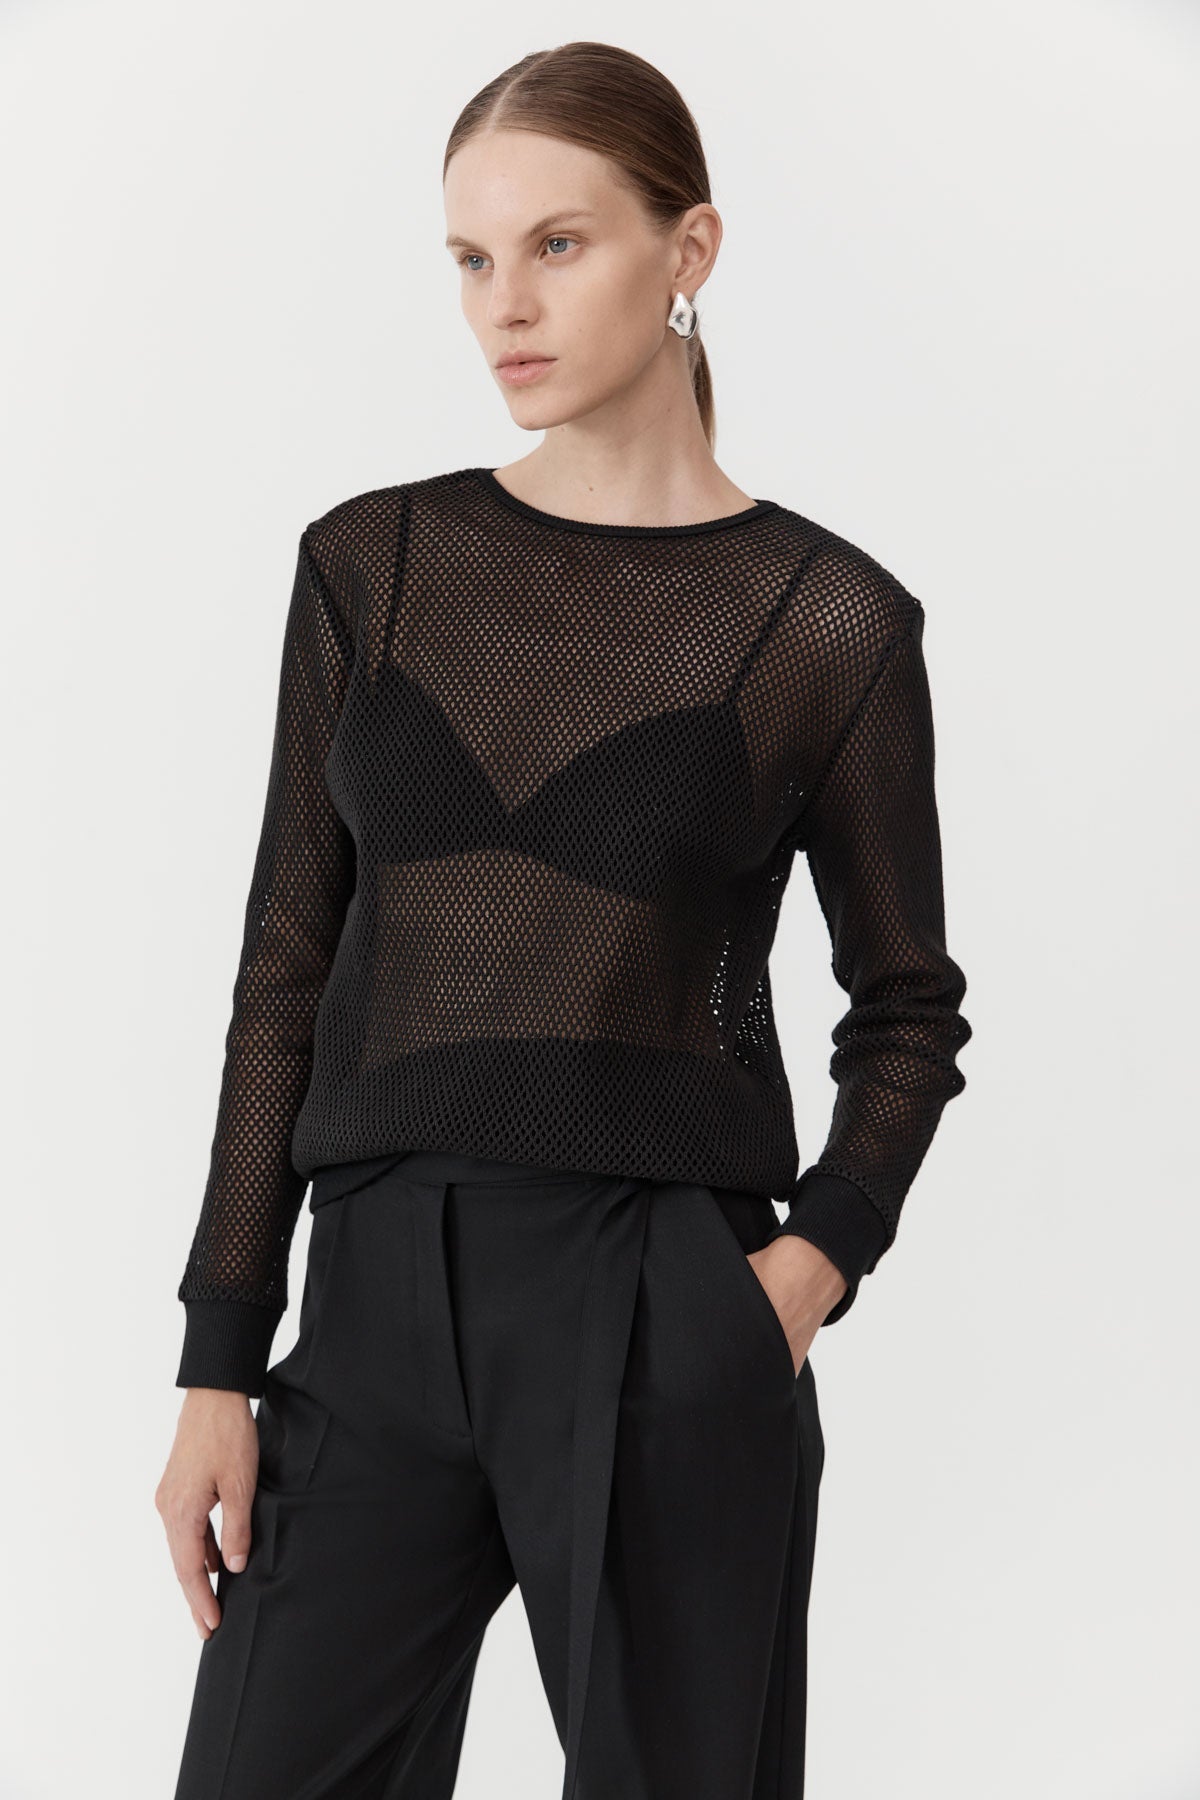 Out From Under Mesh Long Sleeve Top  Long sleeve top outfit, Mesh long  sleeve top outfit, Layering outfits